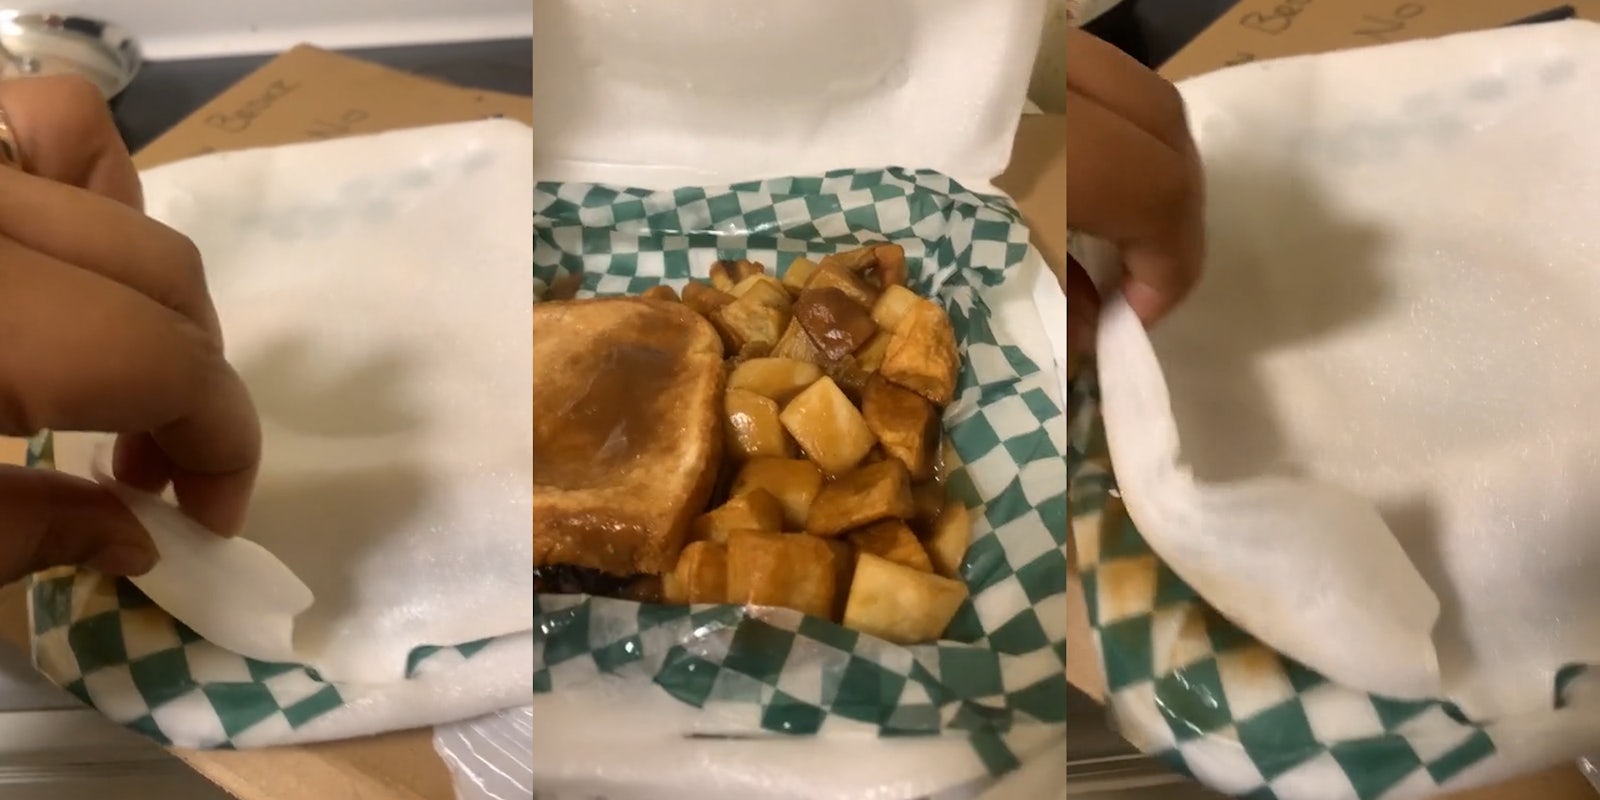 person trying to lift Styrofoam lid from food (l) Styrofoam container finally opened fully to reveal food (c) person trying to lift Styrofoam lid on food (r)